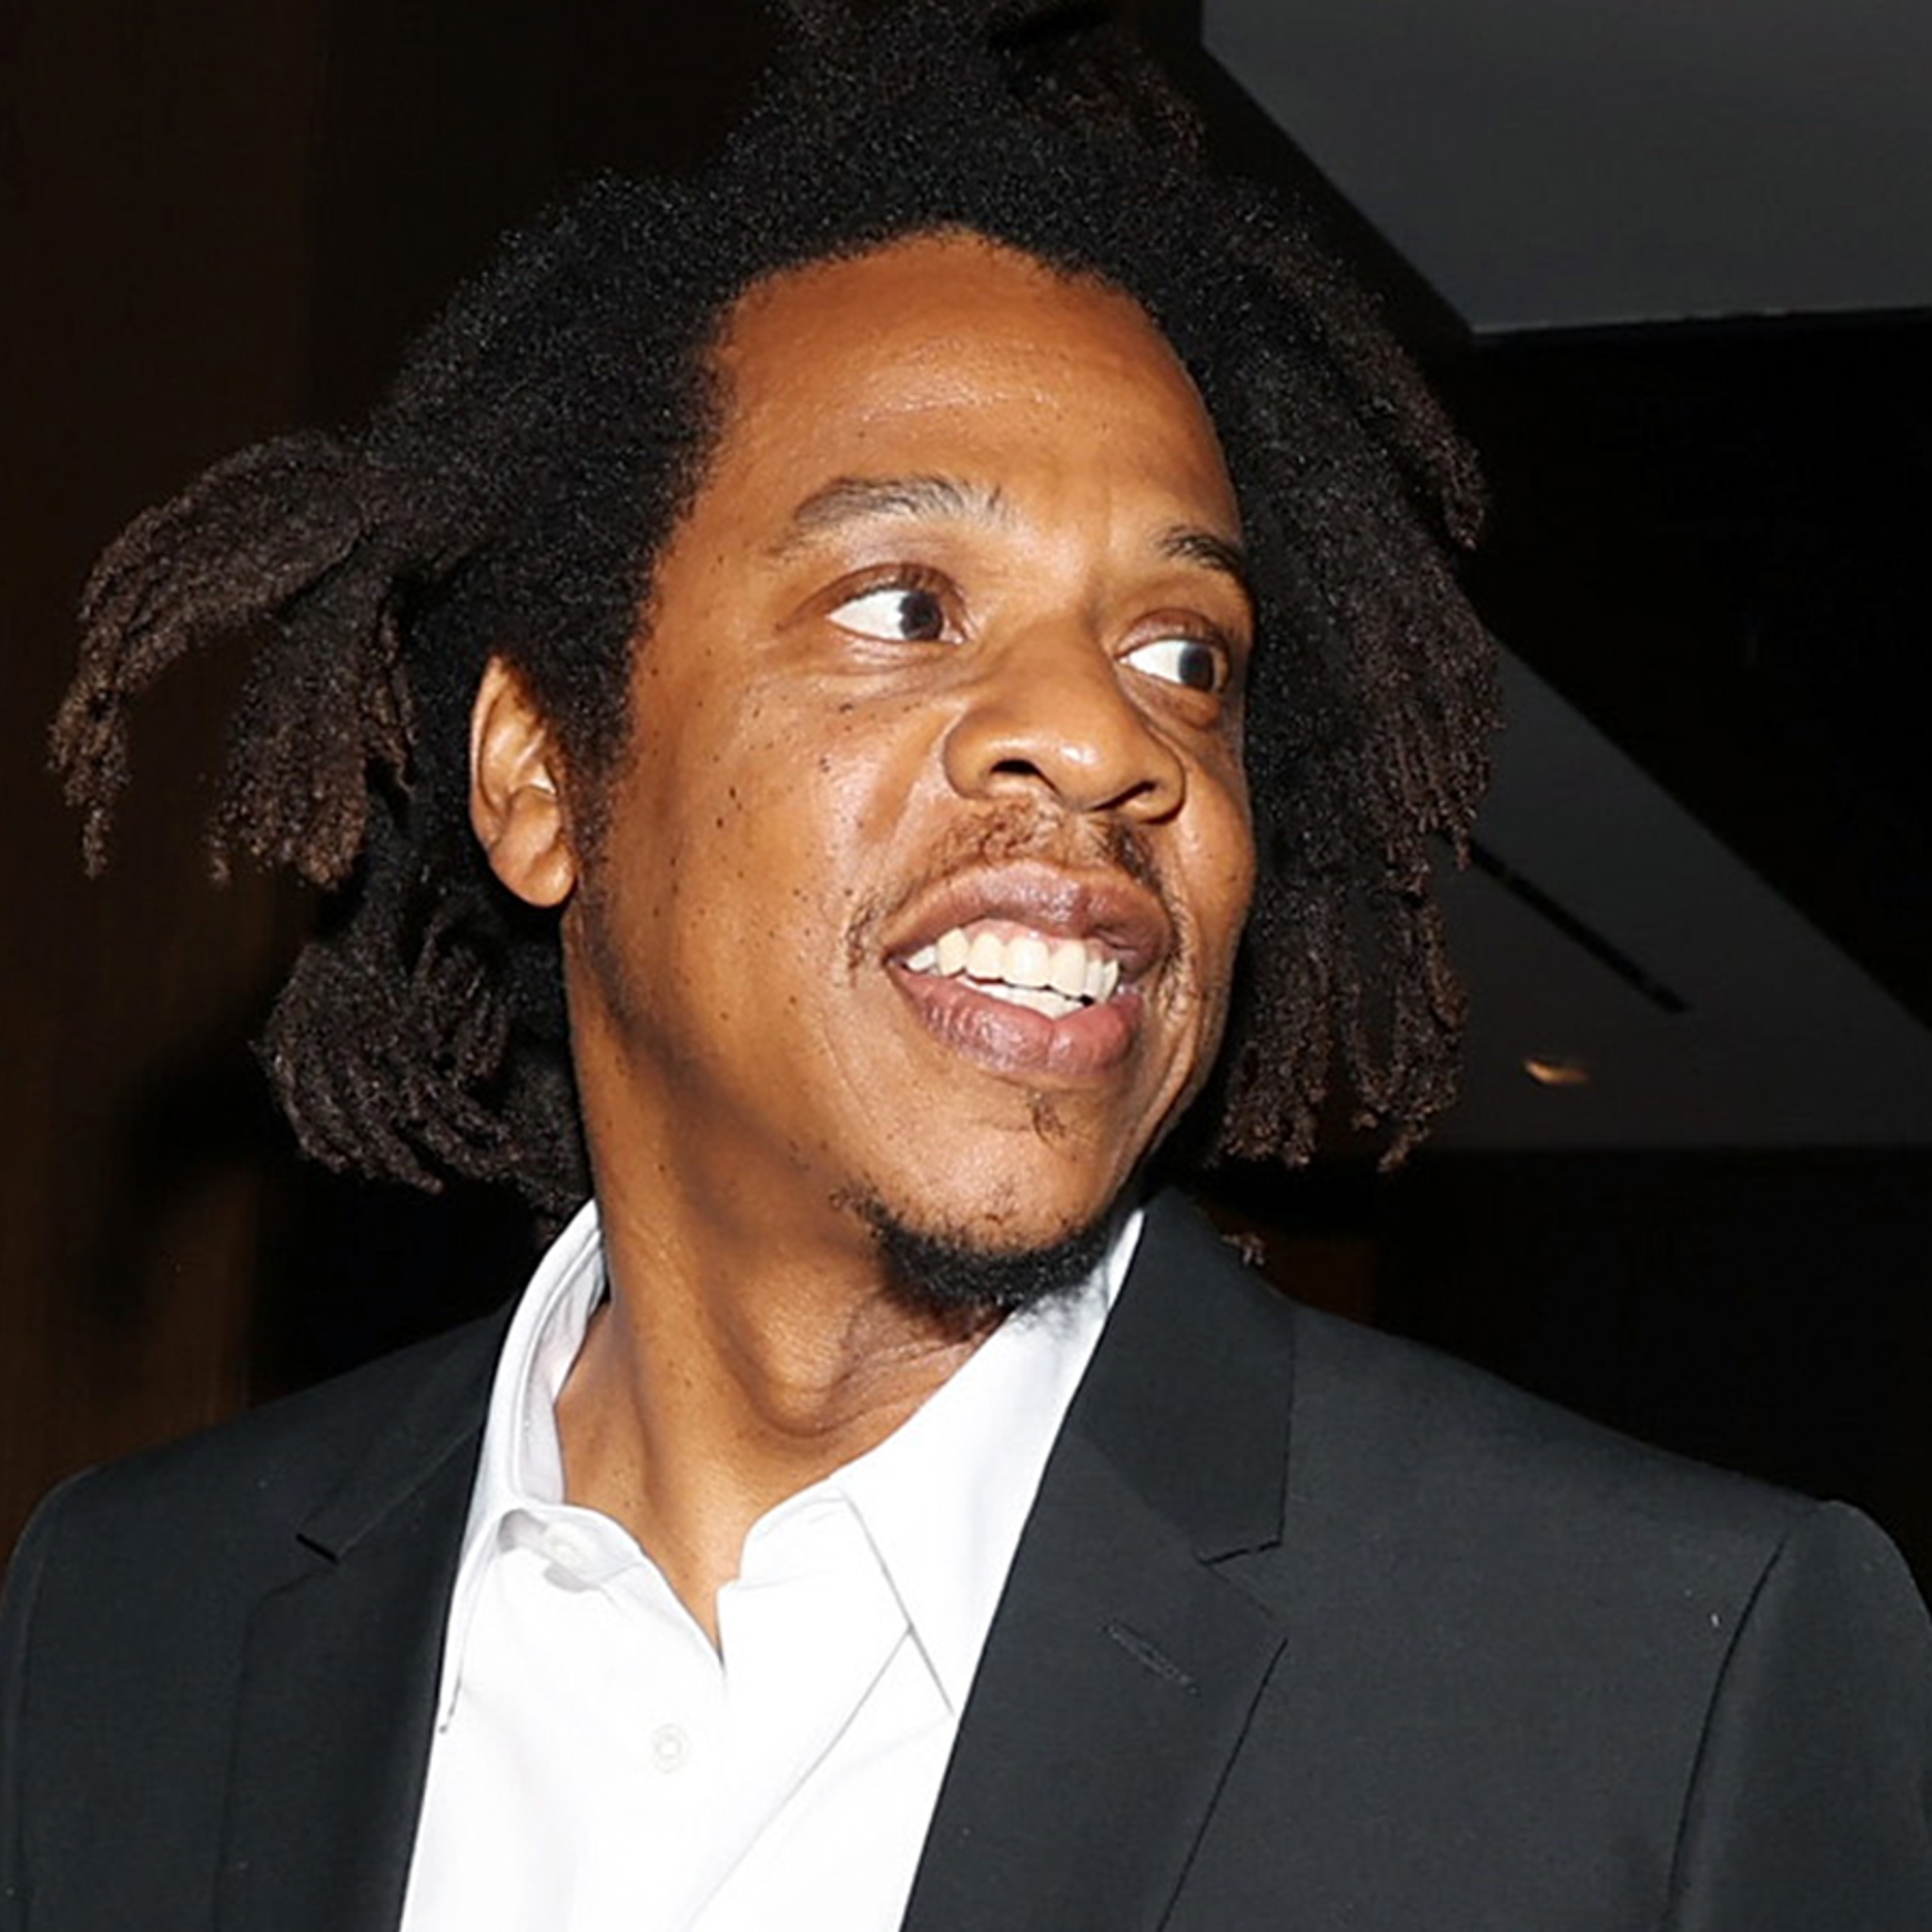 Jay-Z Pockets $7.2 Pays End Parlux Up to Perfume Million, Saga